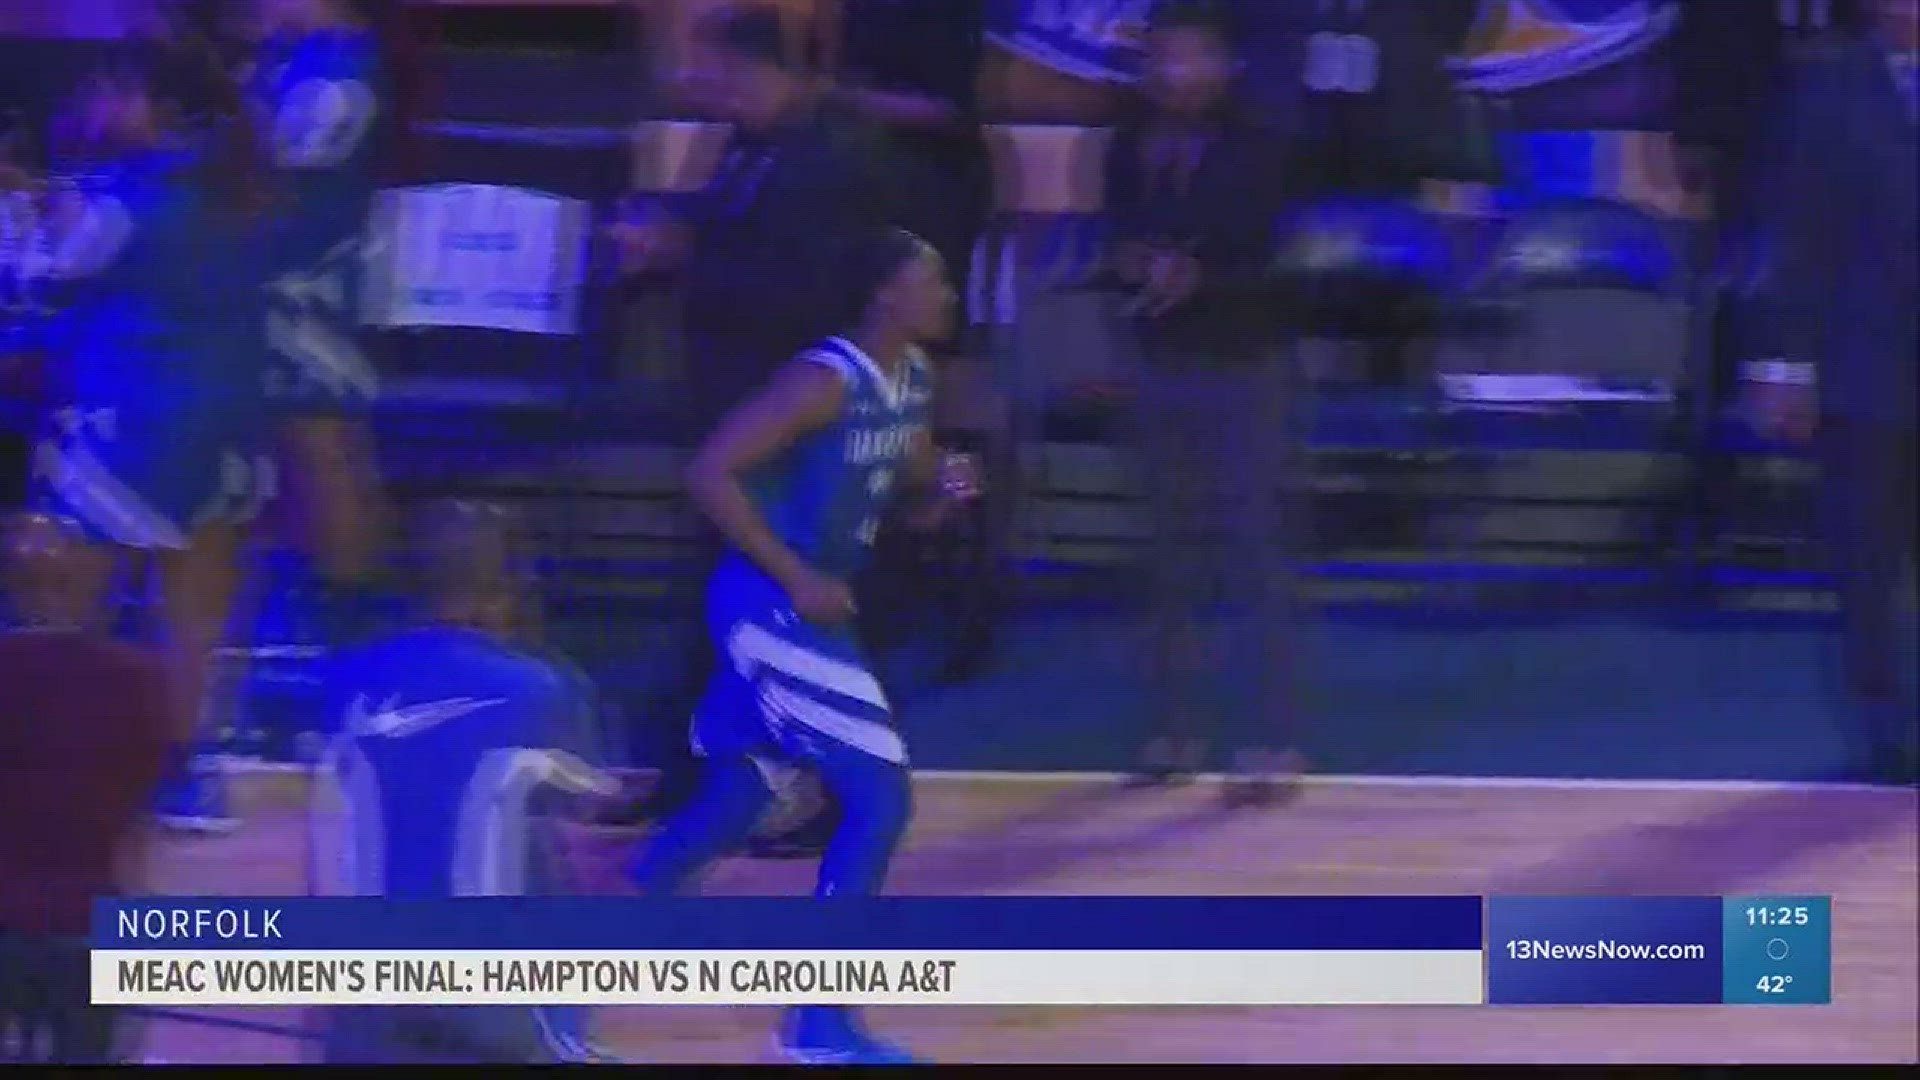 Hampton rallied in the second half forcing overtime, but lost to North Carolina A&T 72-65 in the MEAC Tournament women's final. It was the last for the Lady Pirates who are headed to the Big South next season.